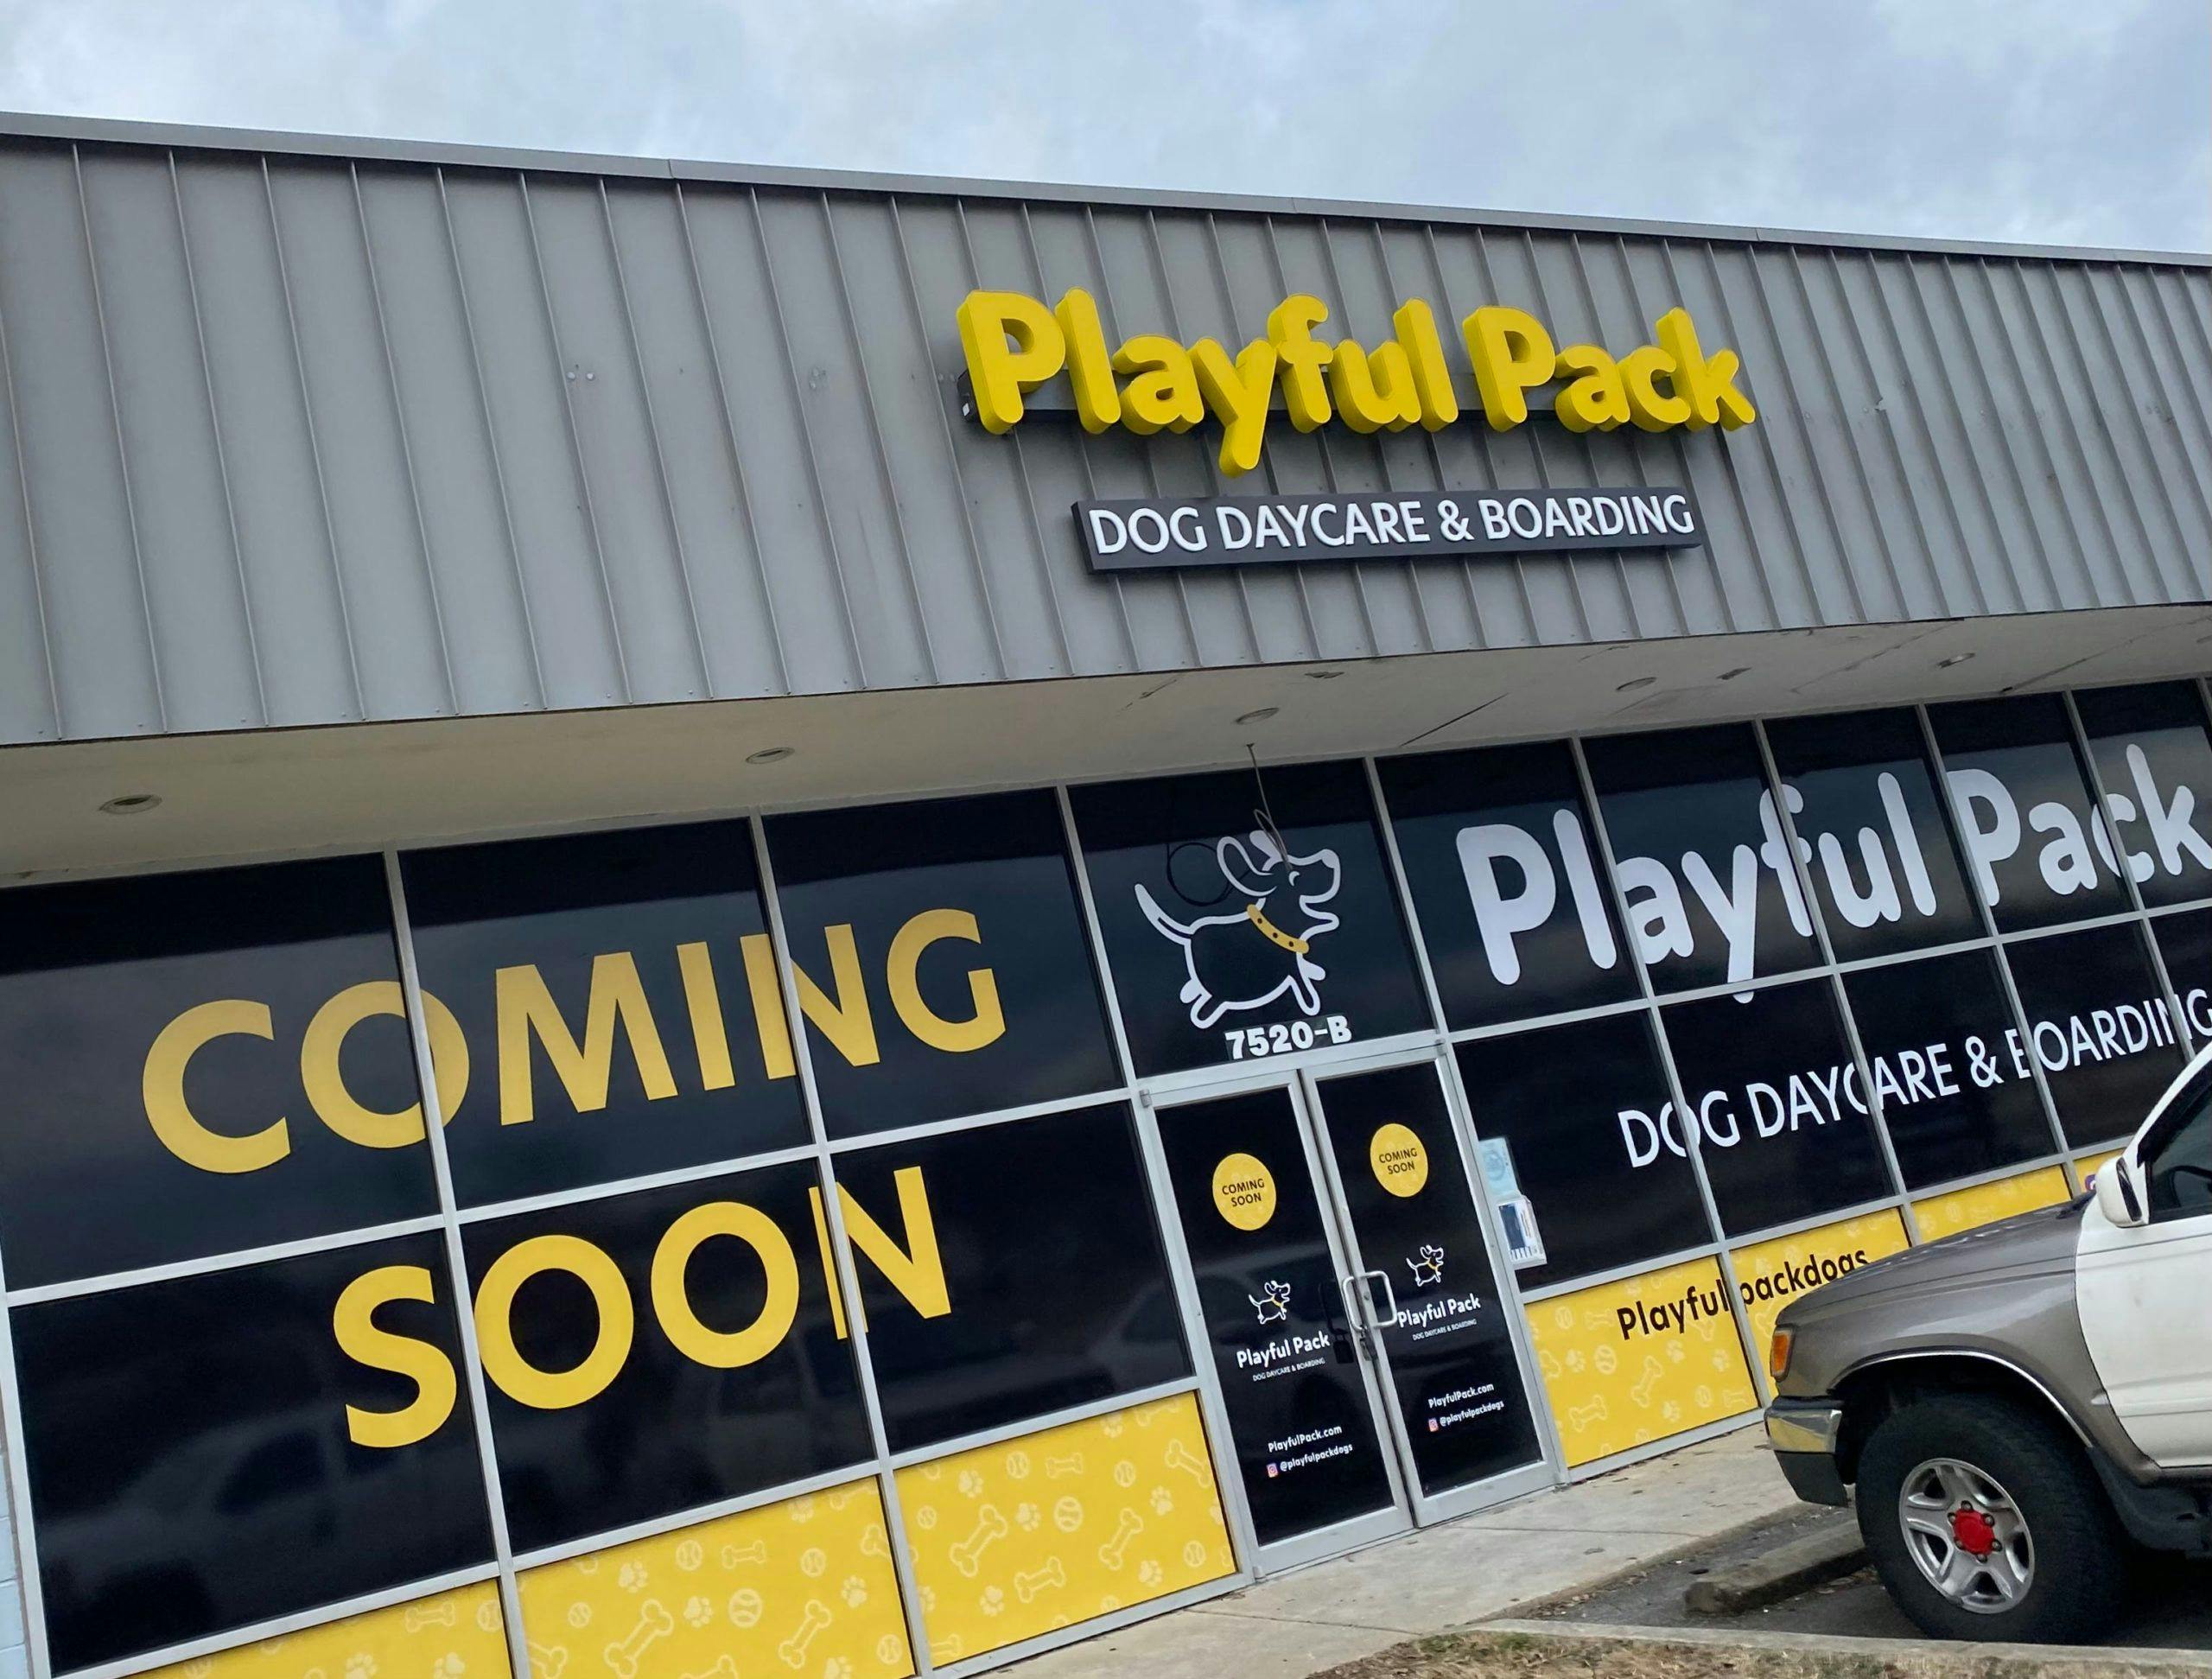 Playful Pack storefront image with coming soon signage